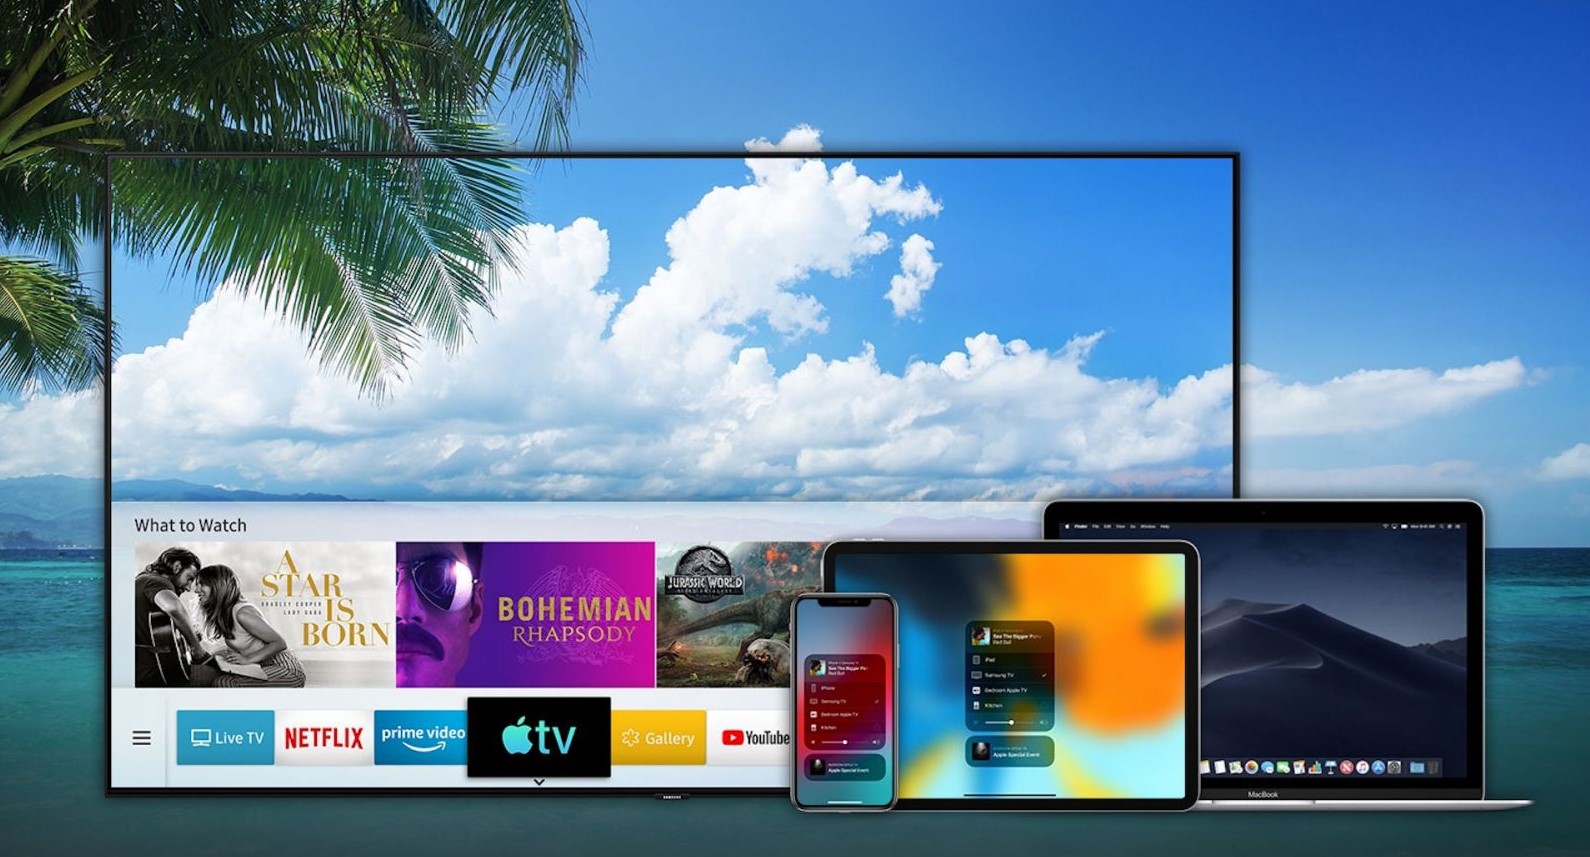 How To Stream From Macbook To Samsung Smart TV